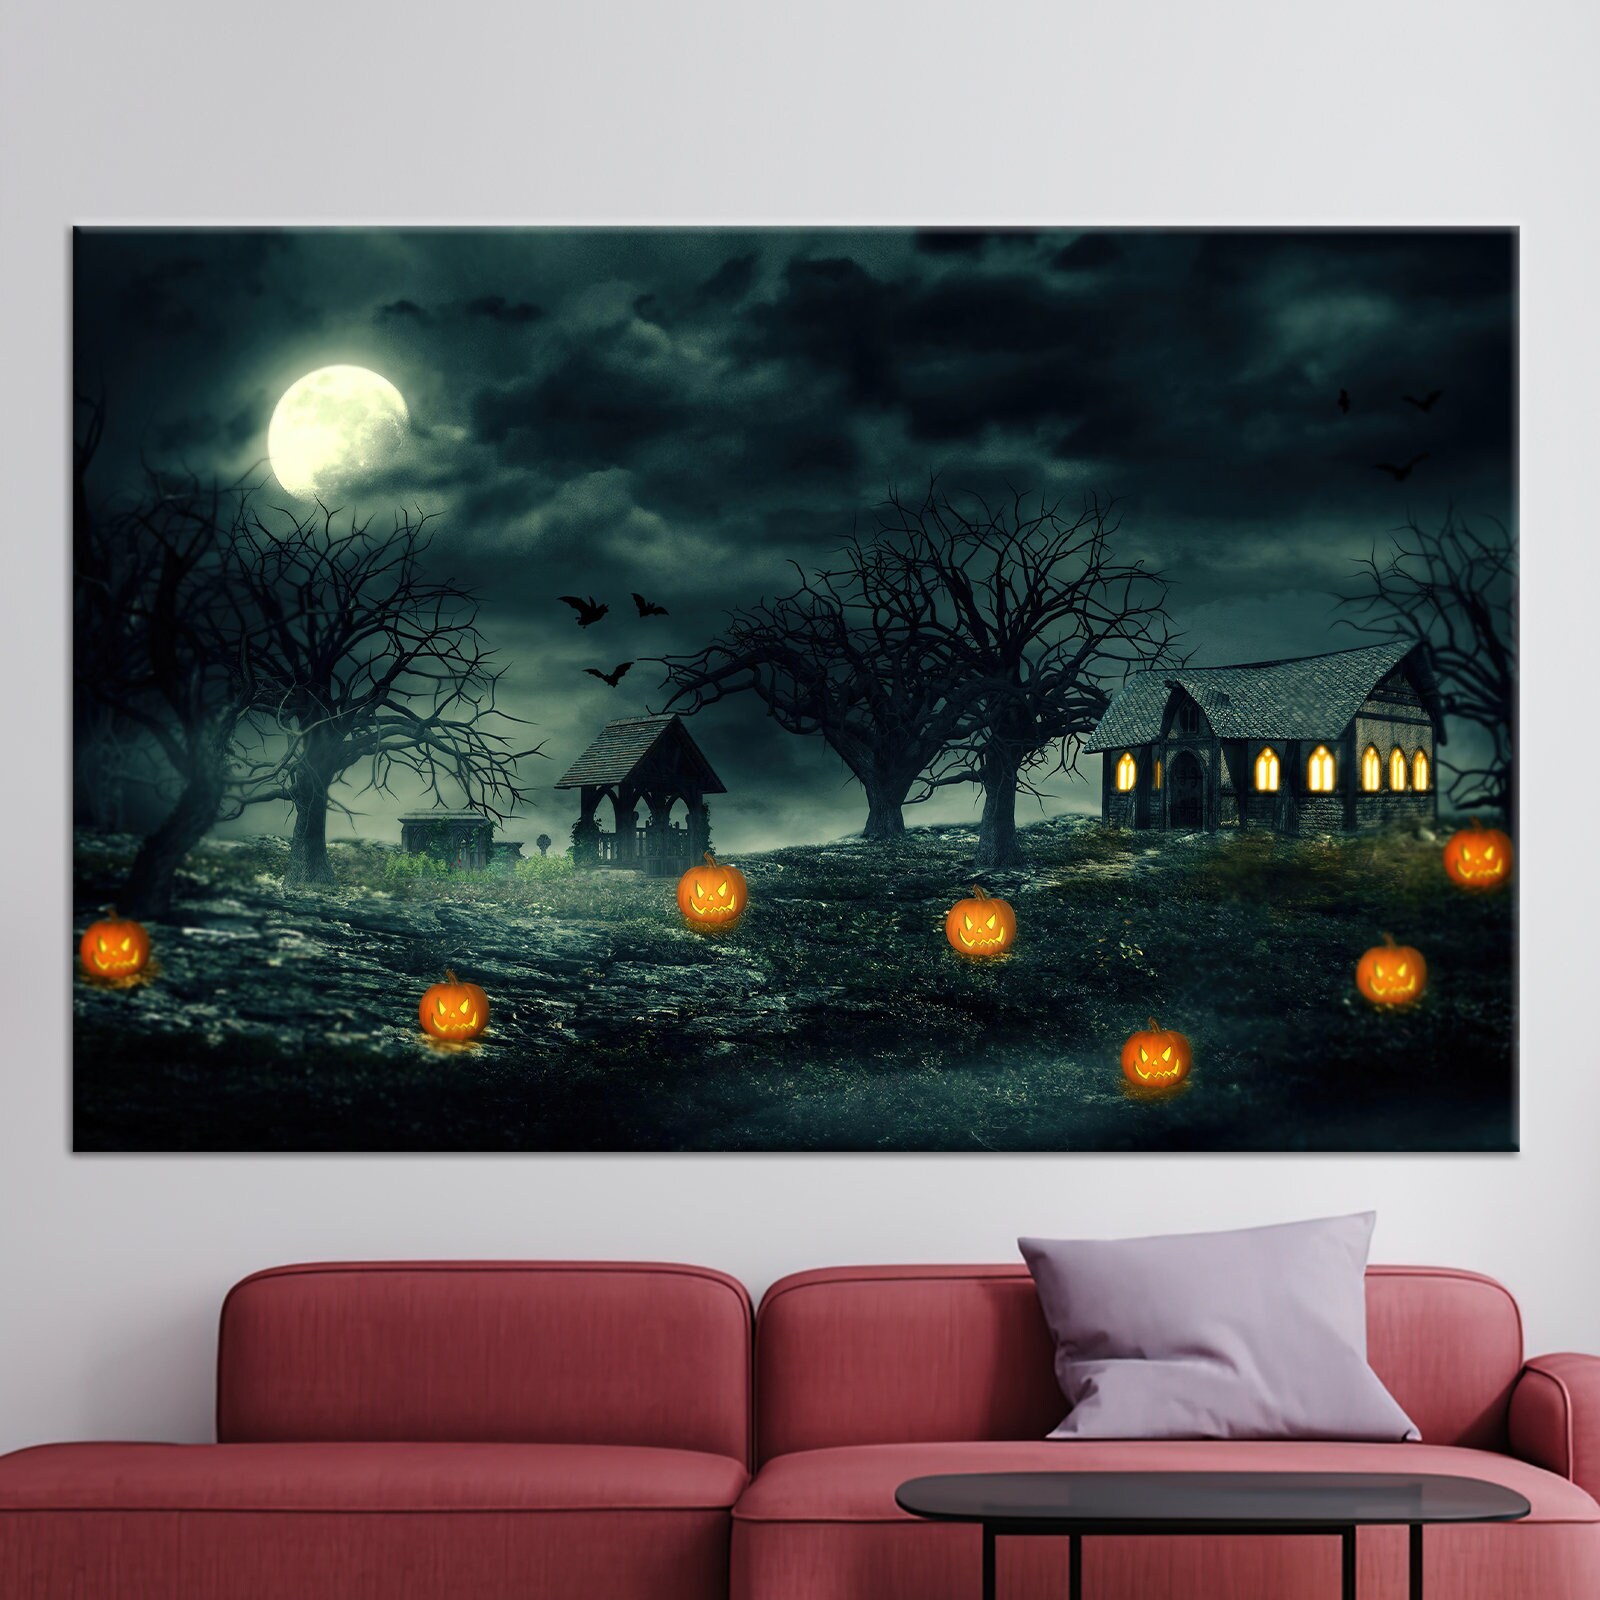 Fine Art & Collectibles :: Painting :: Space Pumpkins Original Oil Painting  - 16x20 inches on canvas board - abstract art, spooky, moon, dark, neon,  Halloween, goth, night, witchy